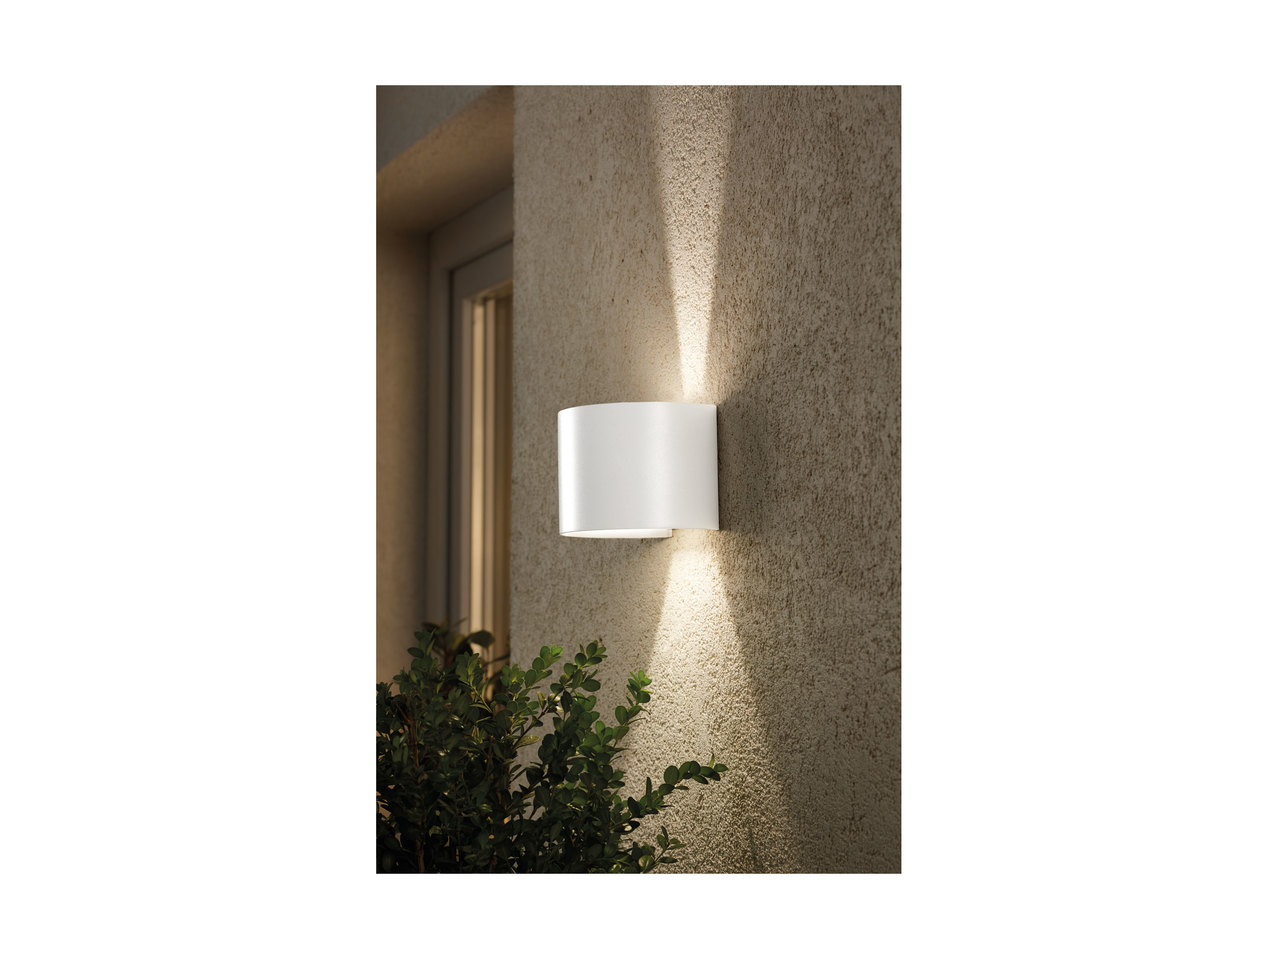 Livarno Lux LED Outdoor Up and Down Wall Light1